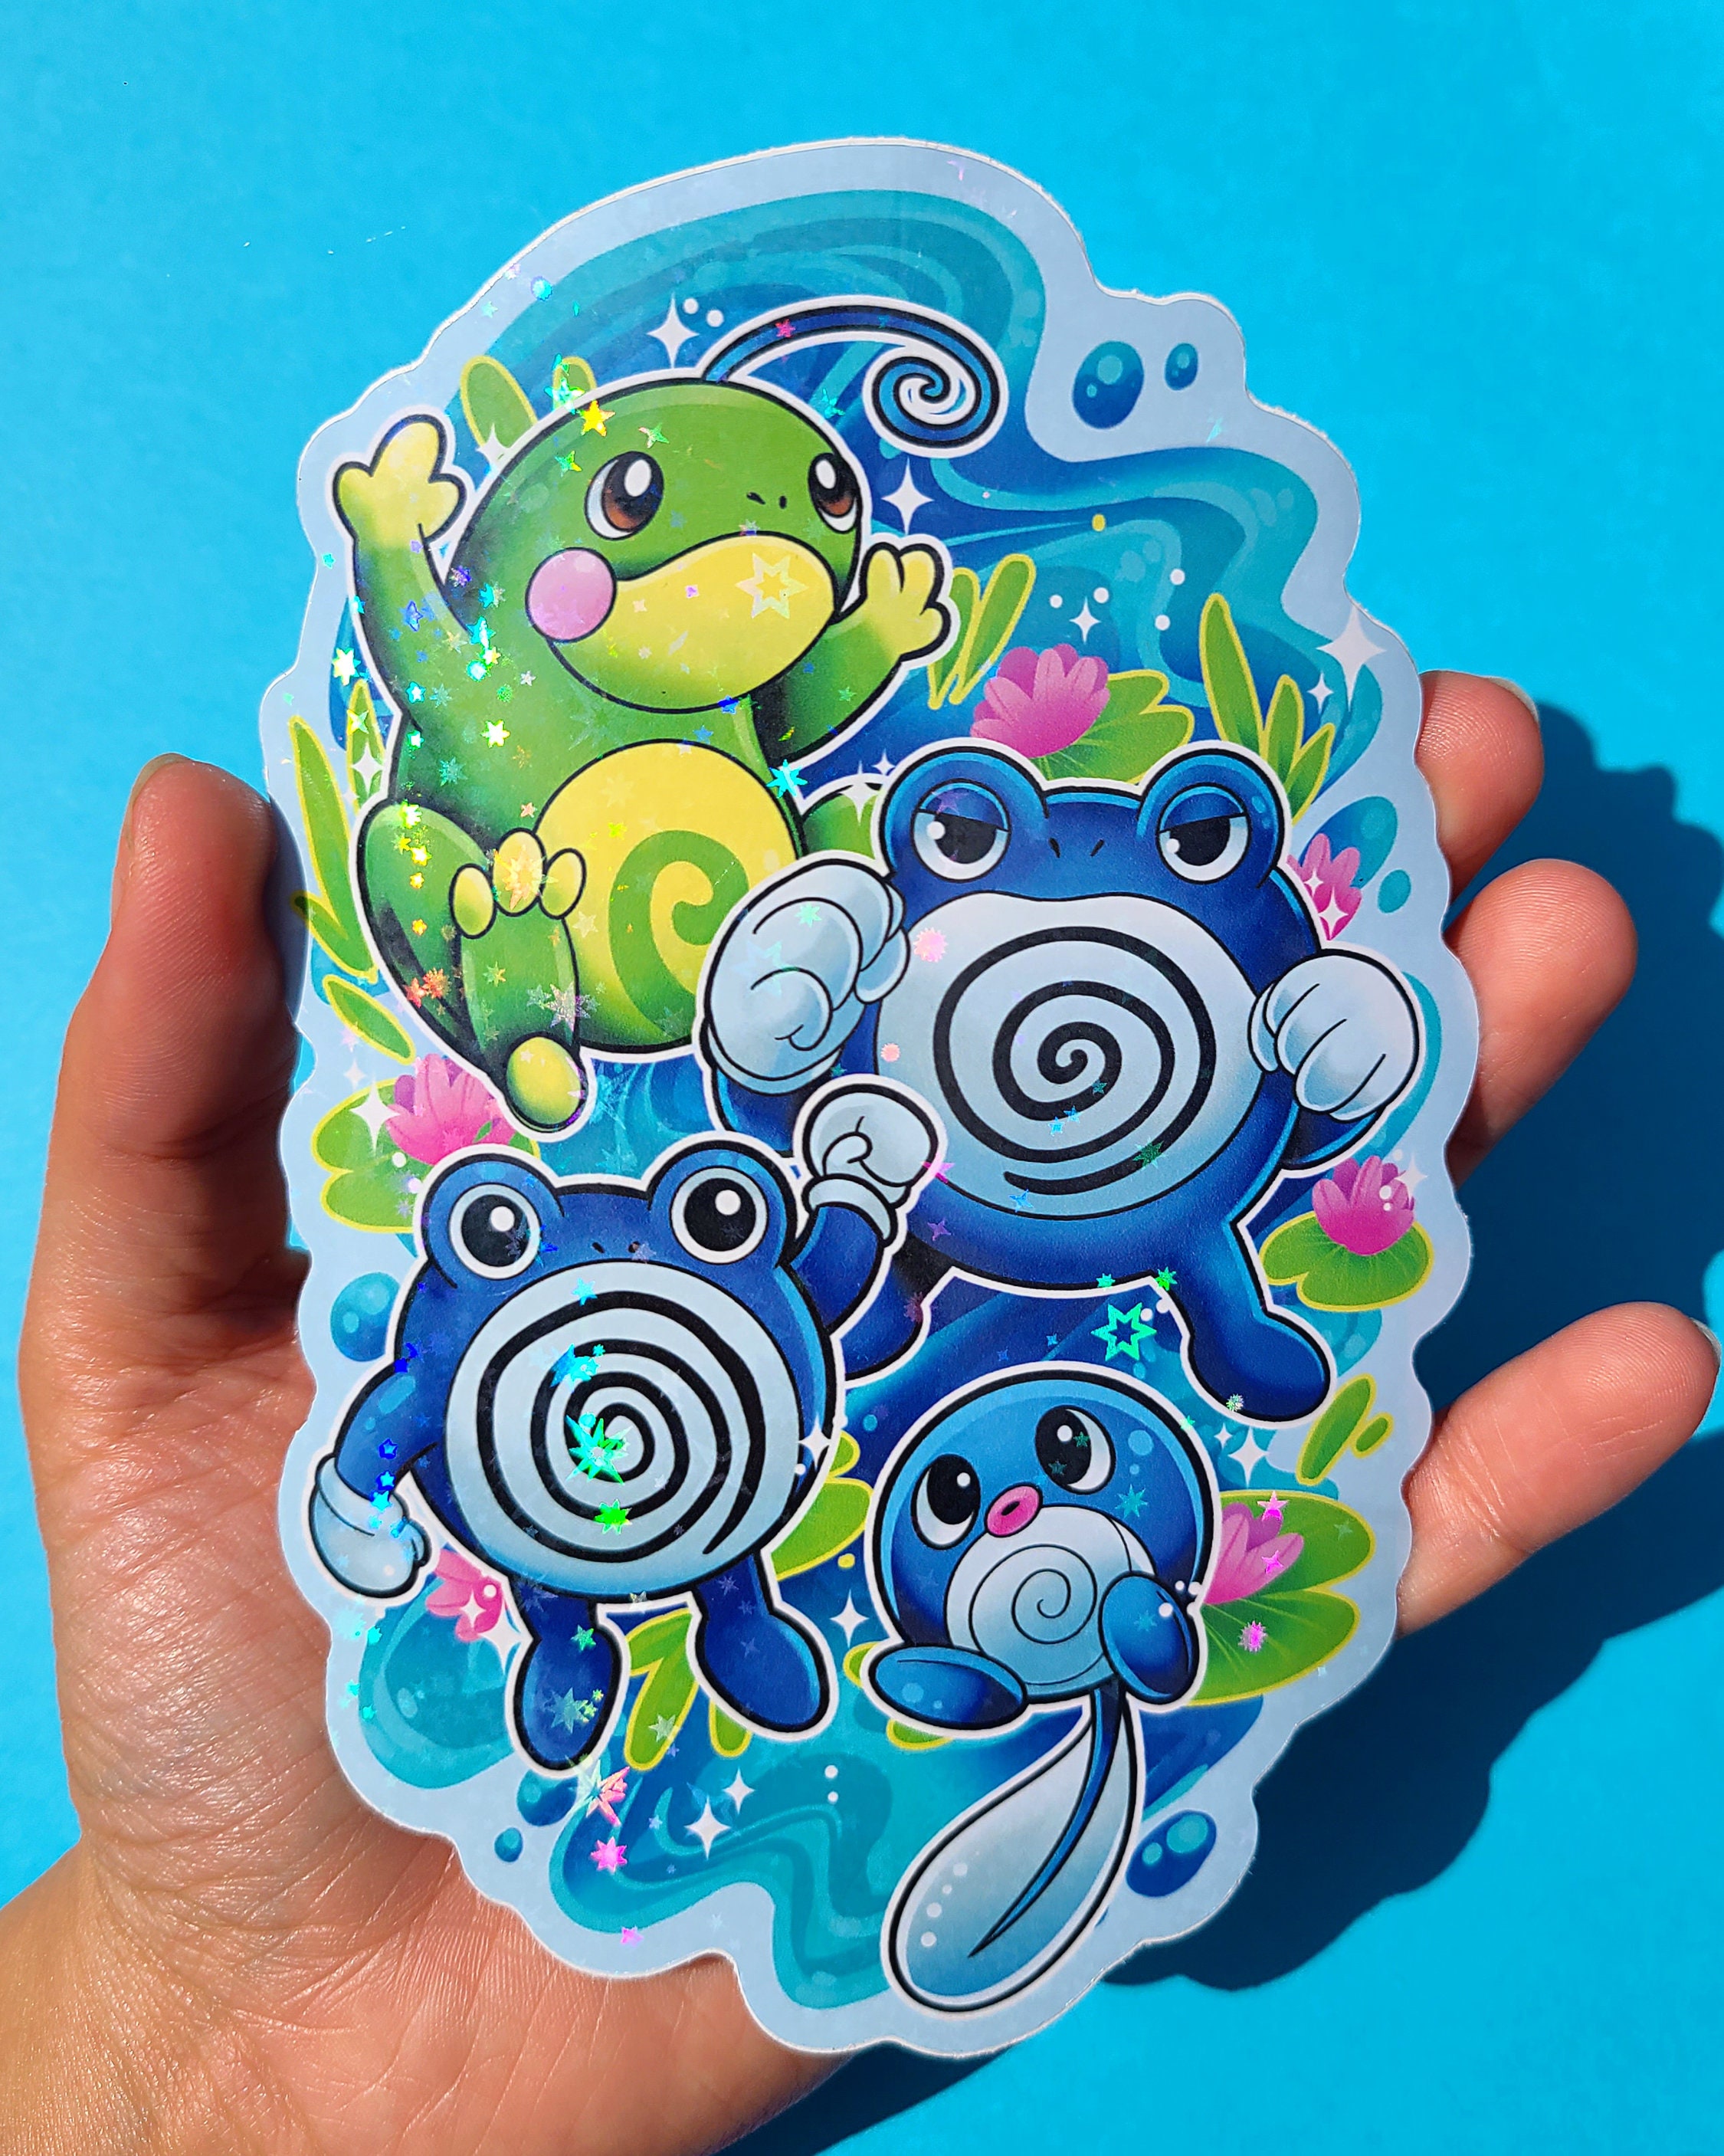 Download Poliwhirl Trading Card Sleeve Wallpaper